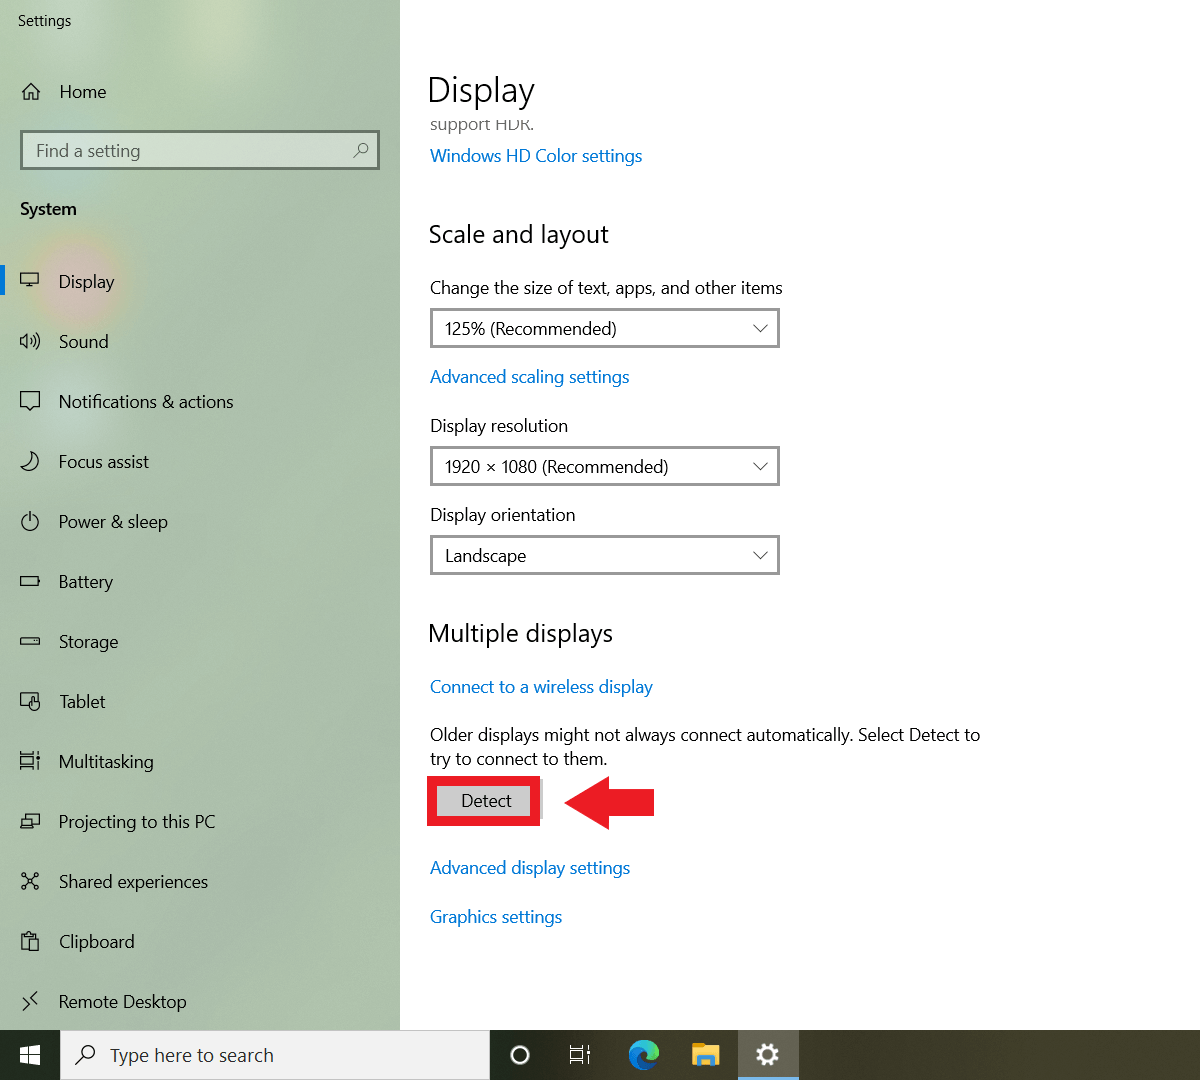 Windows 10 display menu with “Detect” option for “Multiple displays”